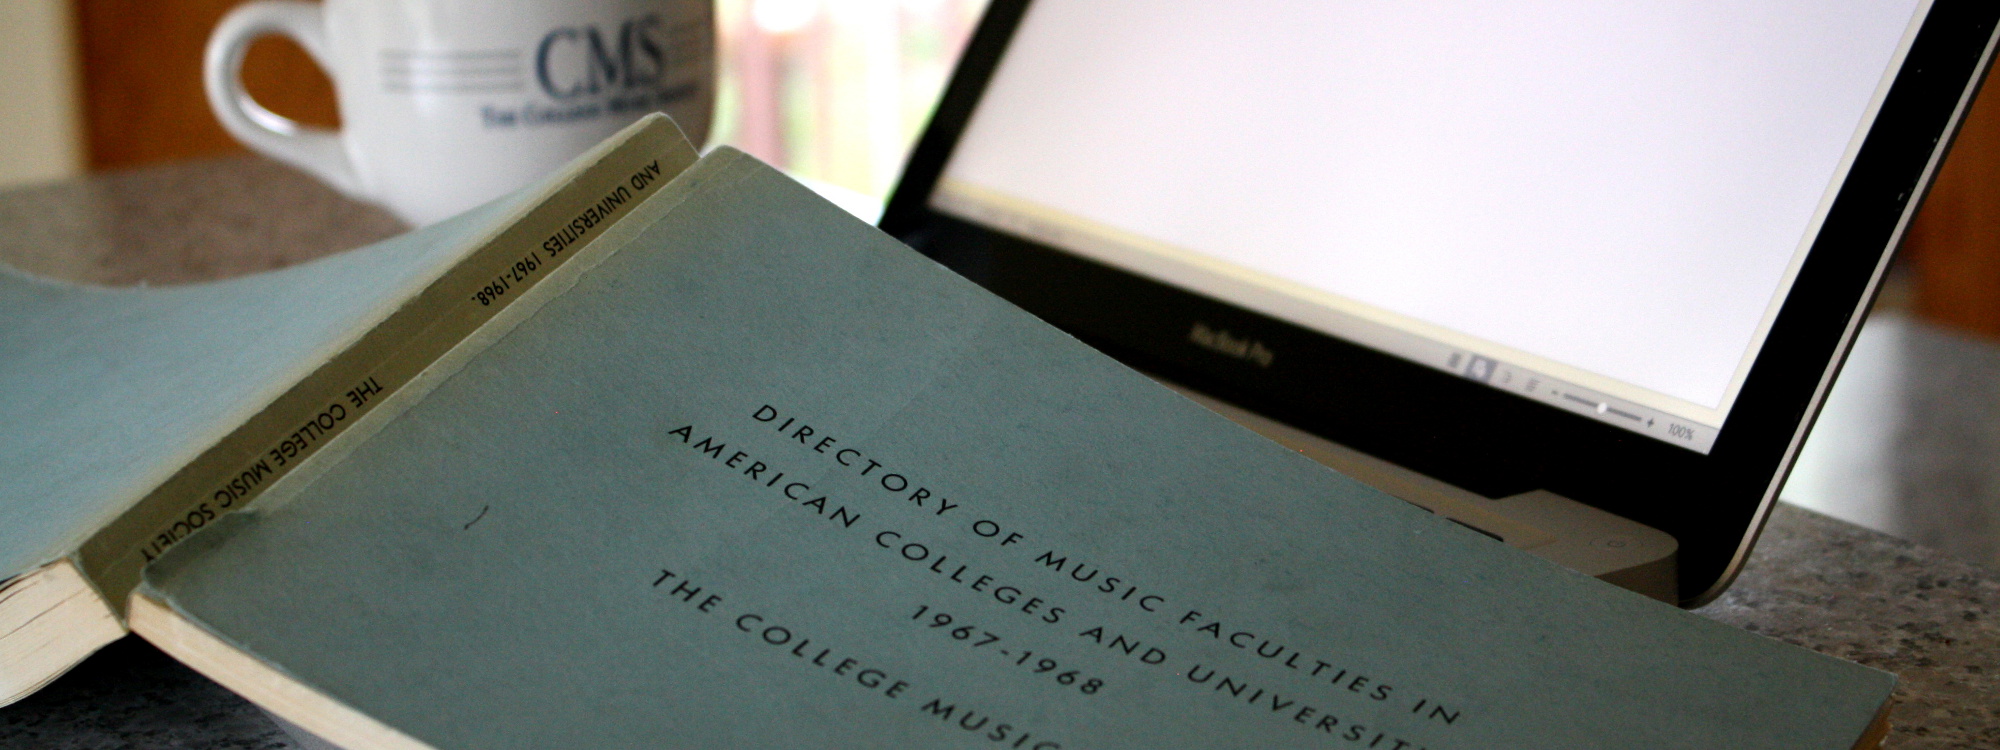 Directory of Music Faculties in Colleges<br> and Universities, U.S. and Canada